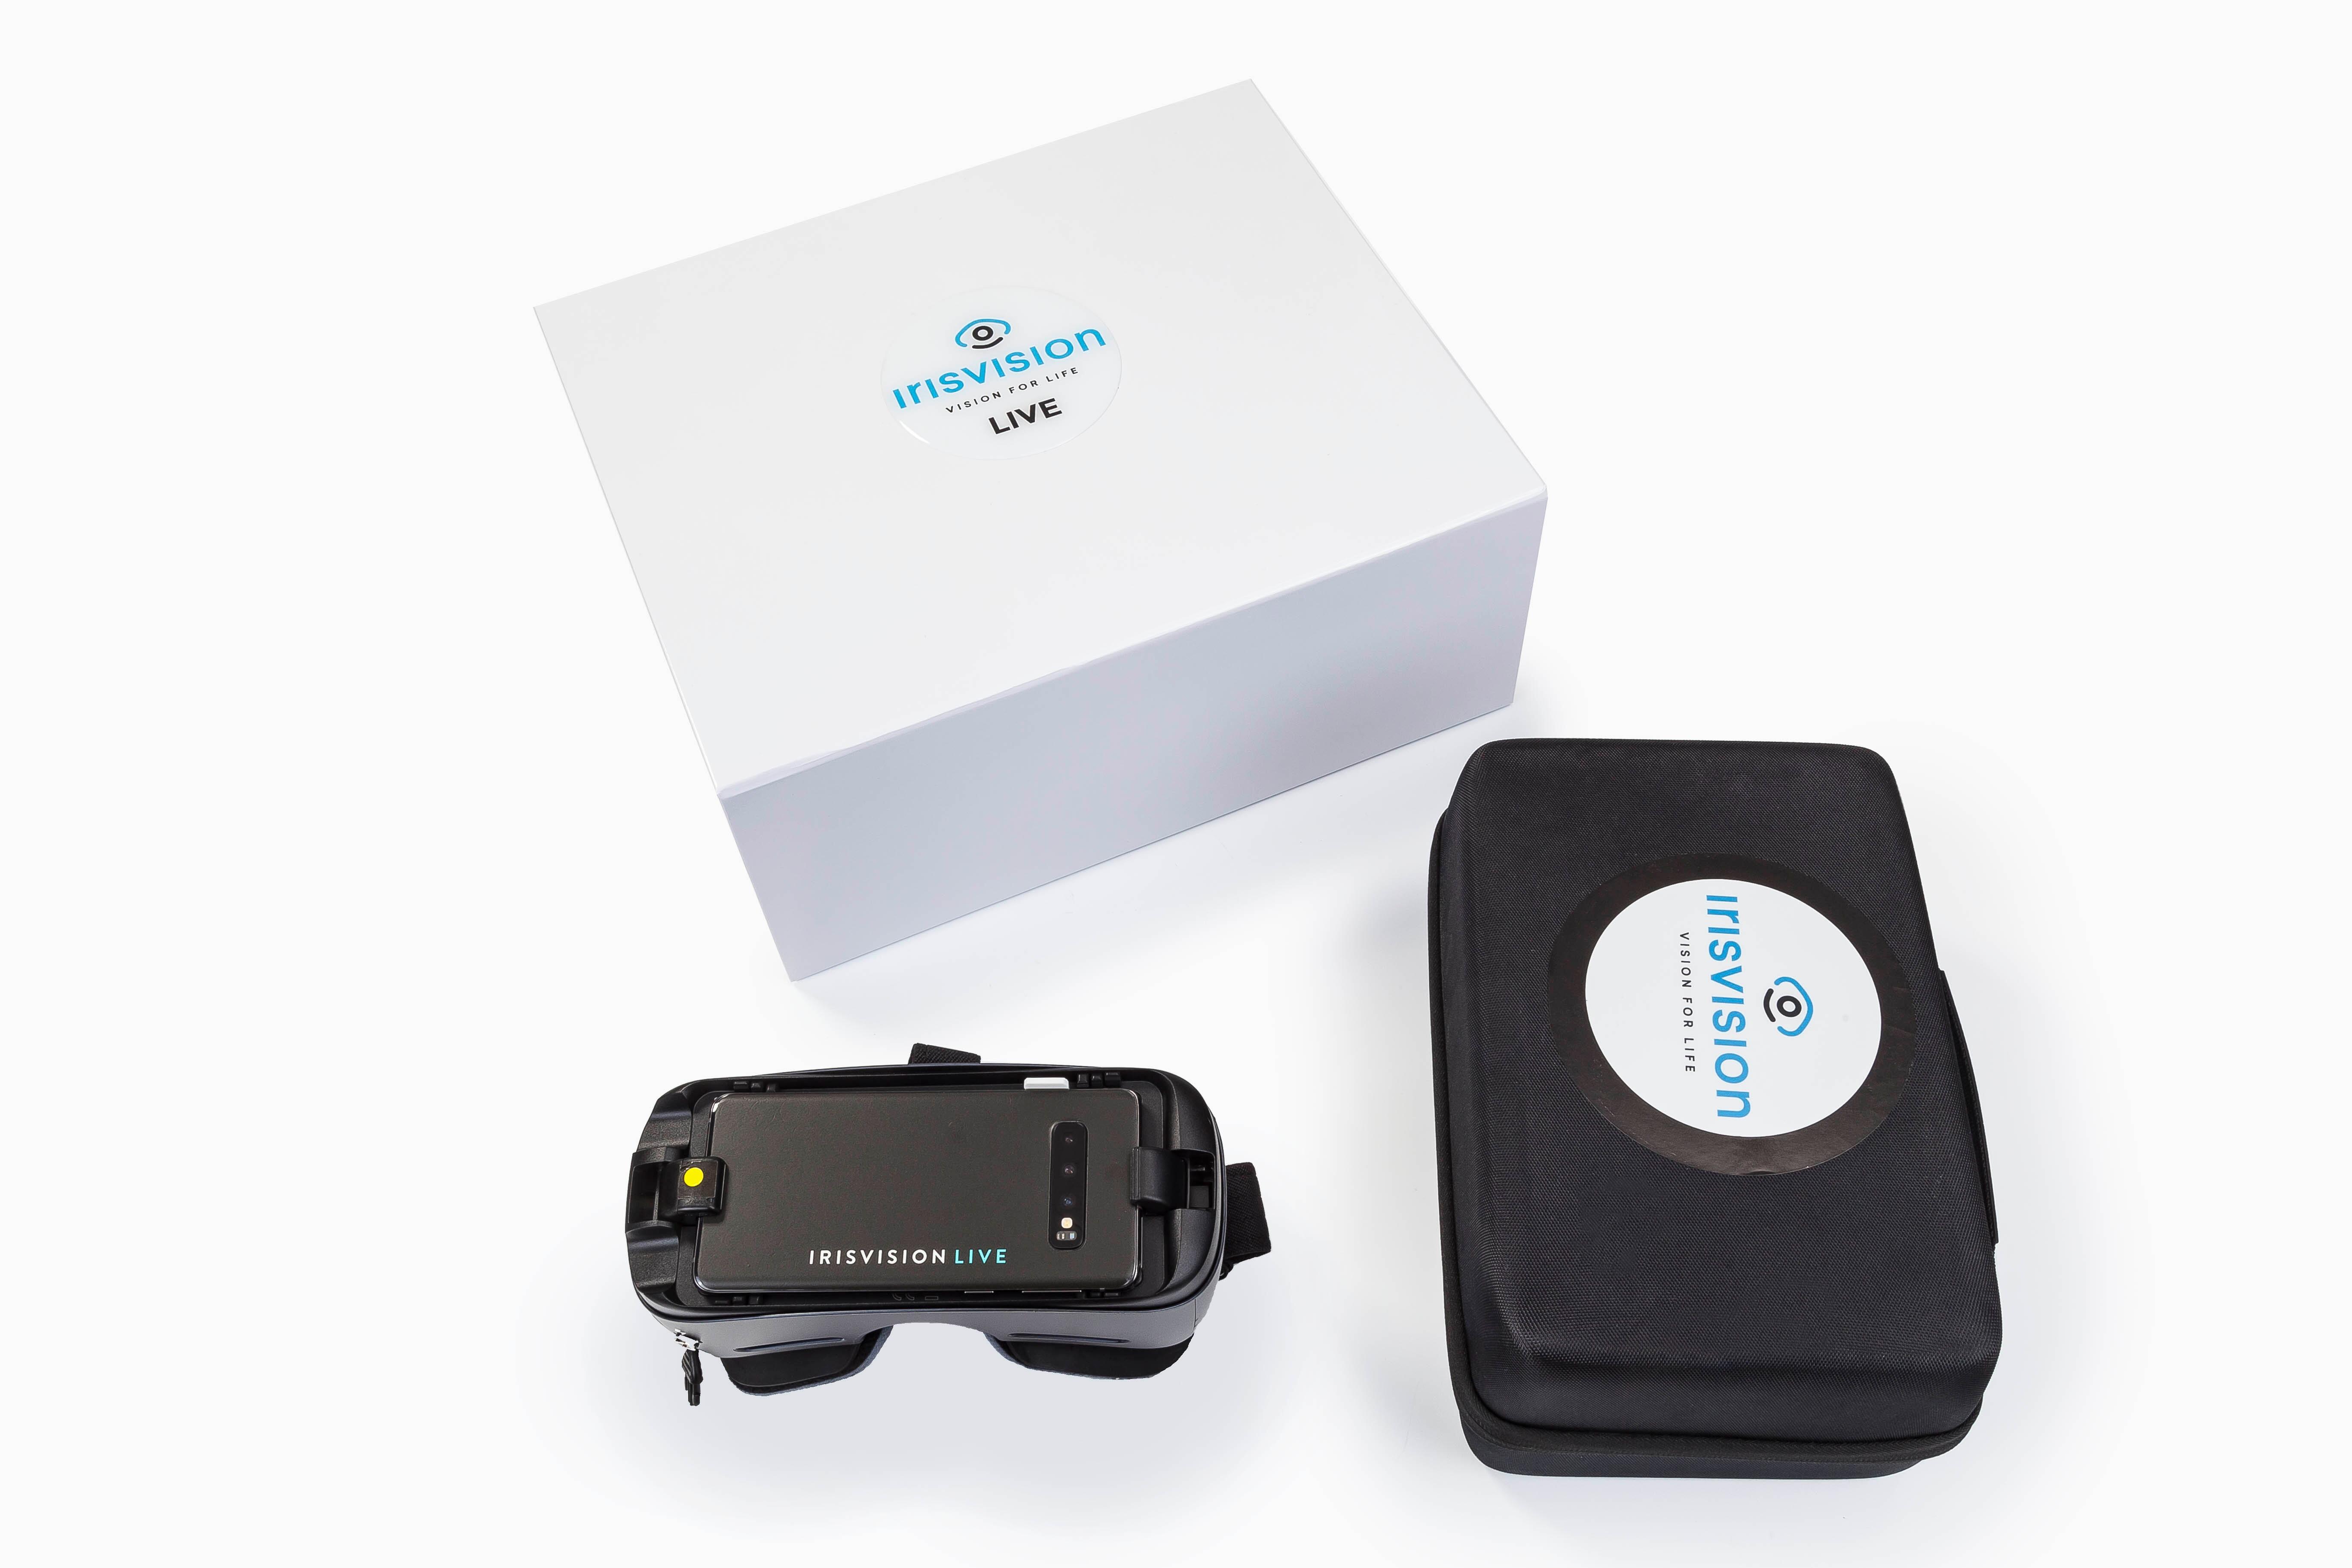 The Irisvision live with its carry case and presentation box